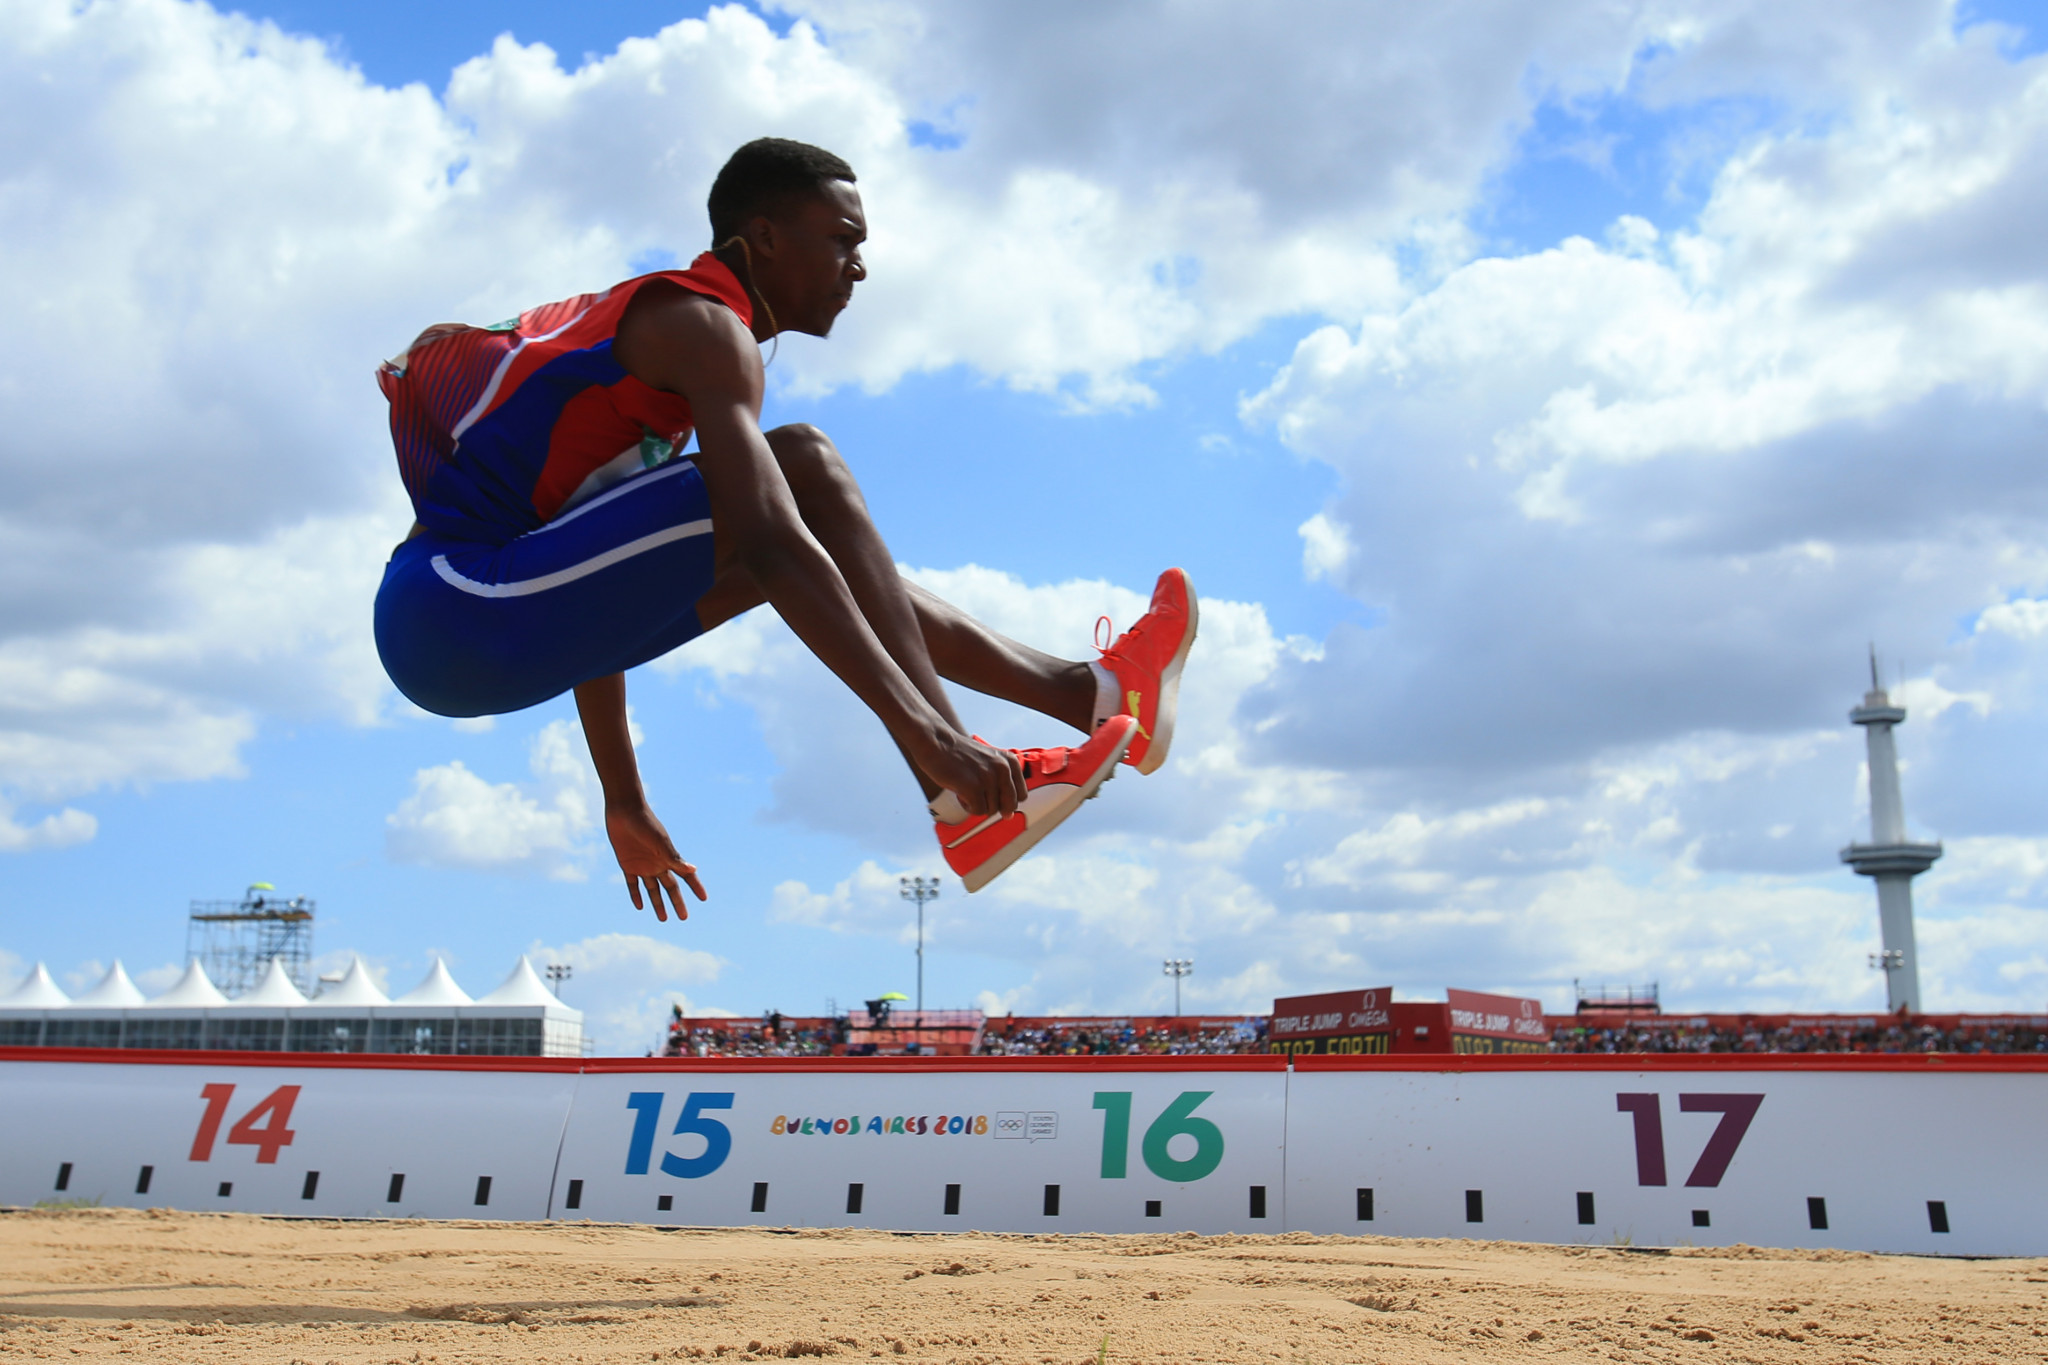 Cuba's Jordan Diaz Fortun, U-20 triple jump world champion, enhanced his reputation when he won gold in the same event in Buenos Aires ©Getty Images